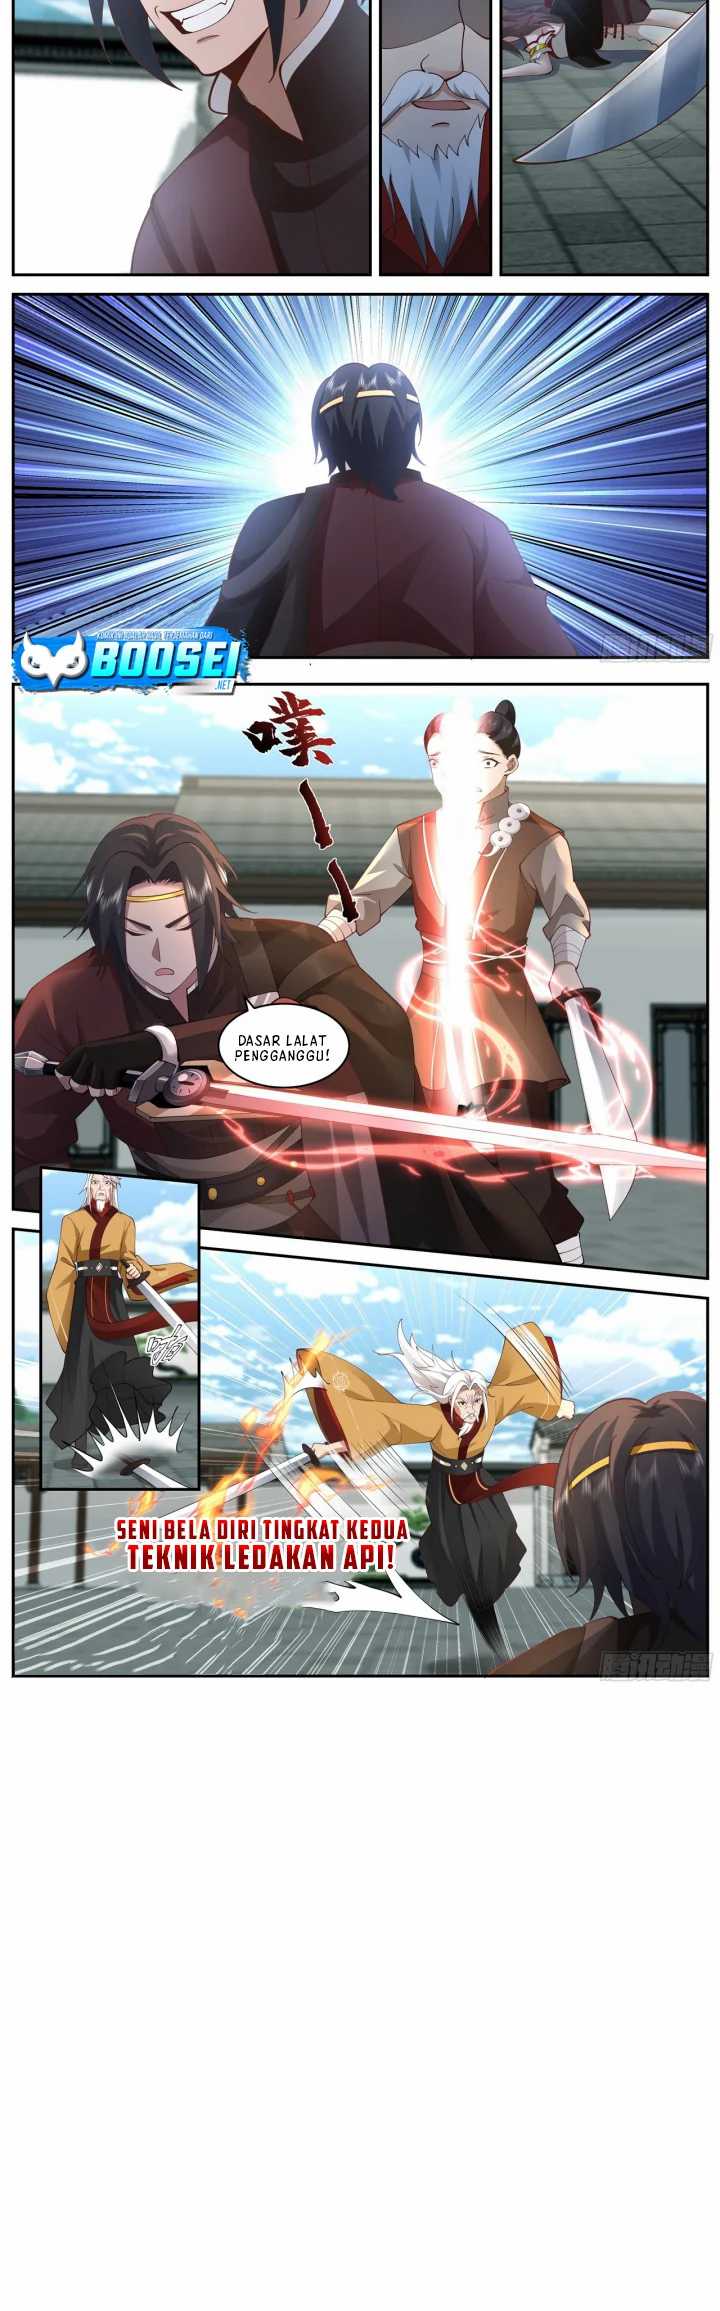 A Sword’s Evolution Begins From Killing Chapter 15